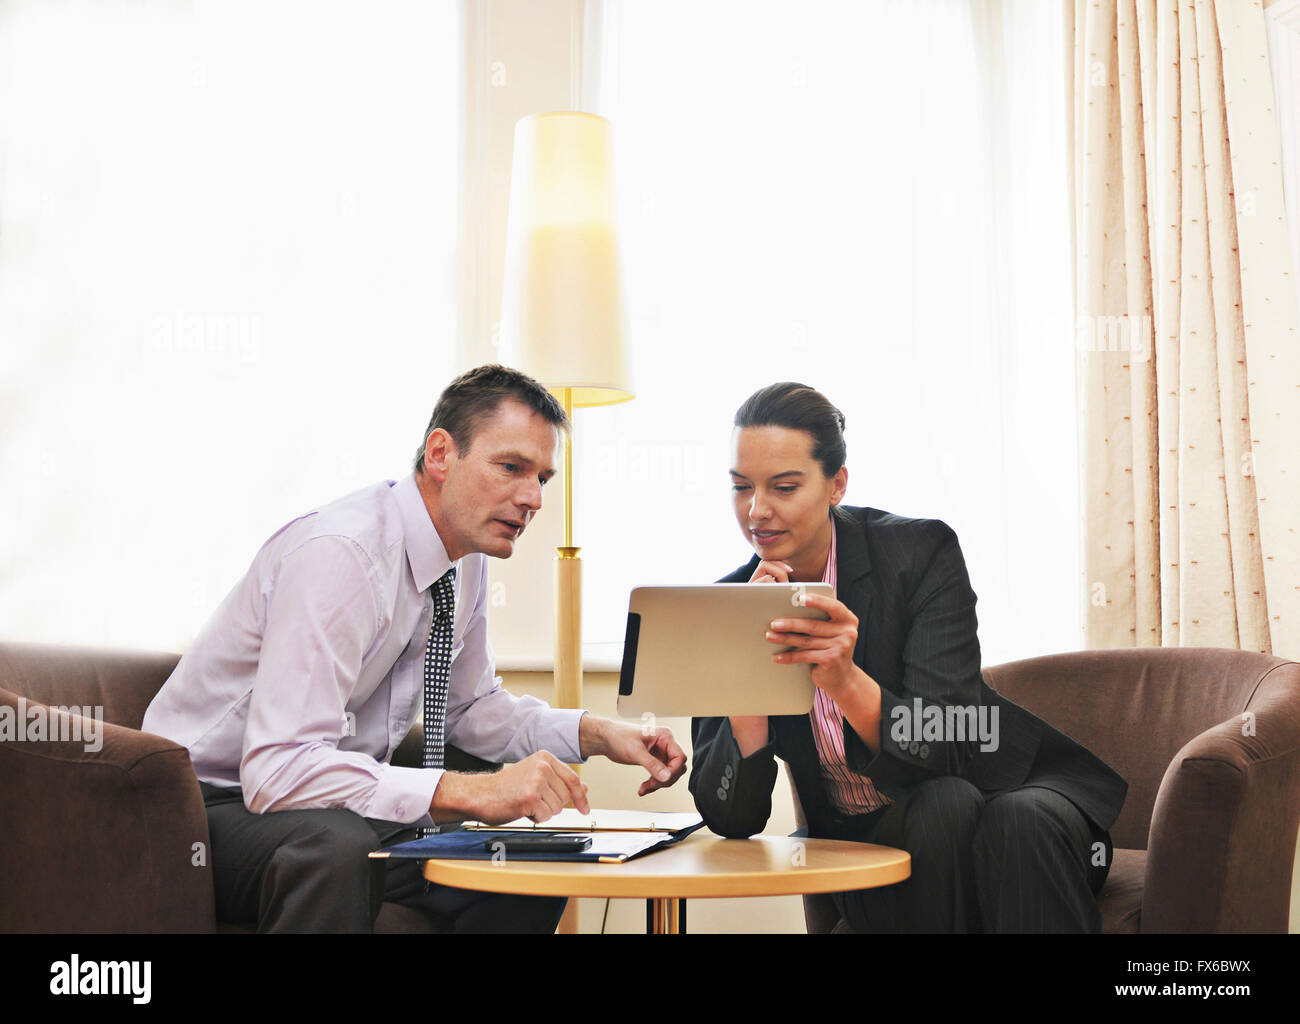 Caucasian business people using digital tablet in lounge Banque D'Images